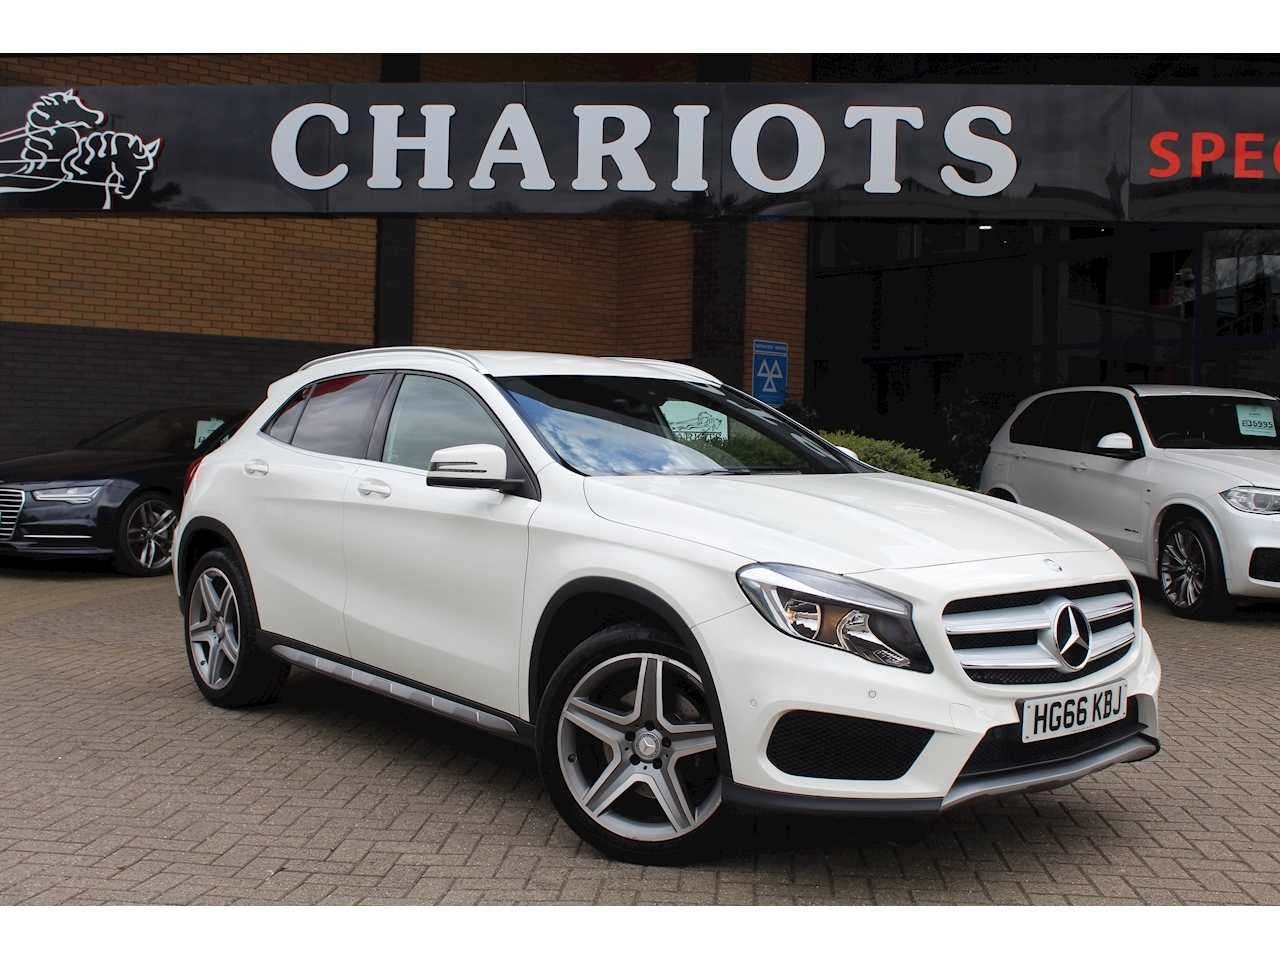 2.1 GLA220d AMG Line (Executive) SUV 5dr Diesel 7G-DCT 4MATIC (s/s) (130 g/km, 174 bhp)